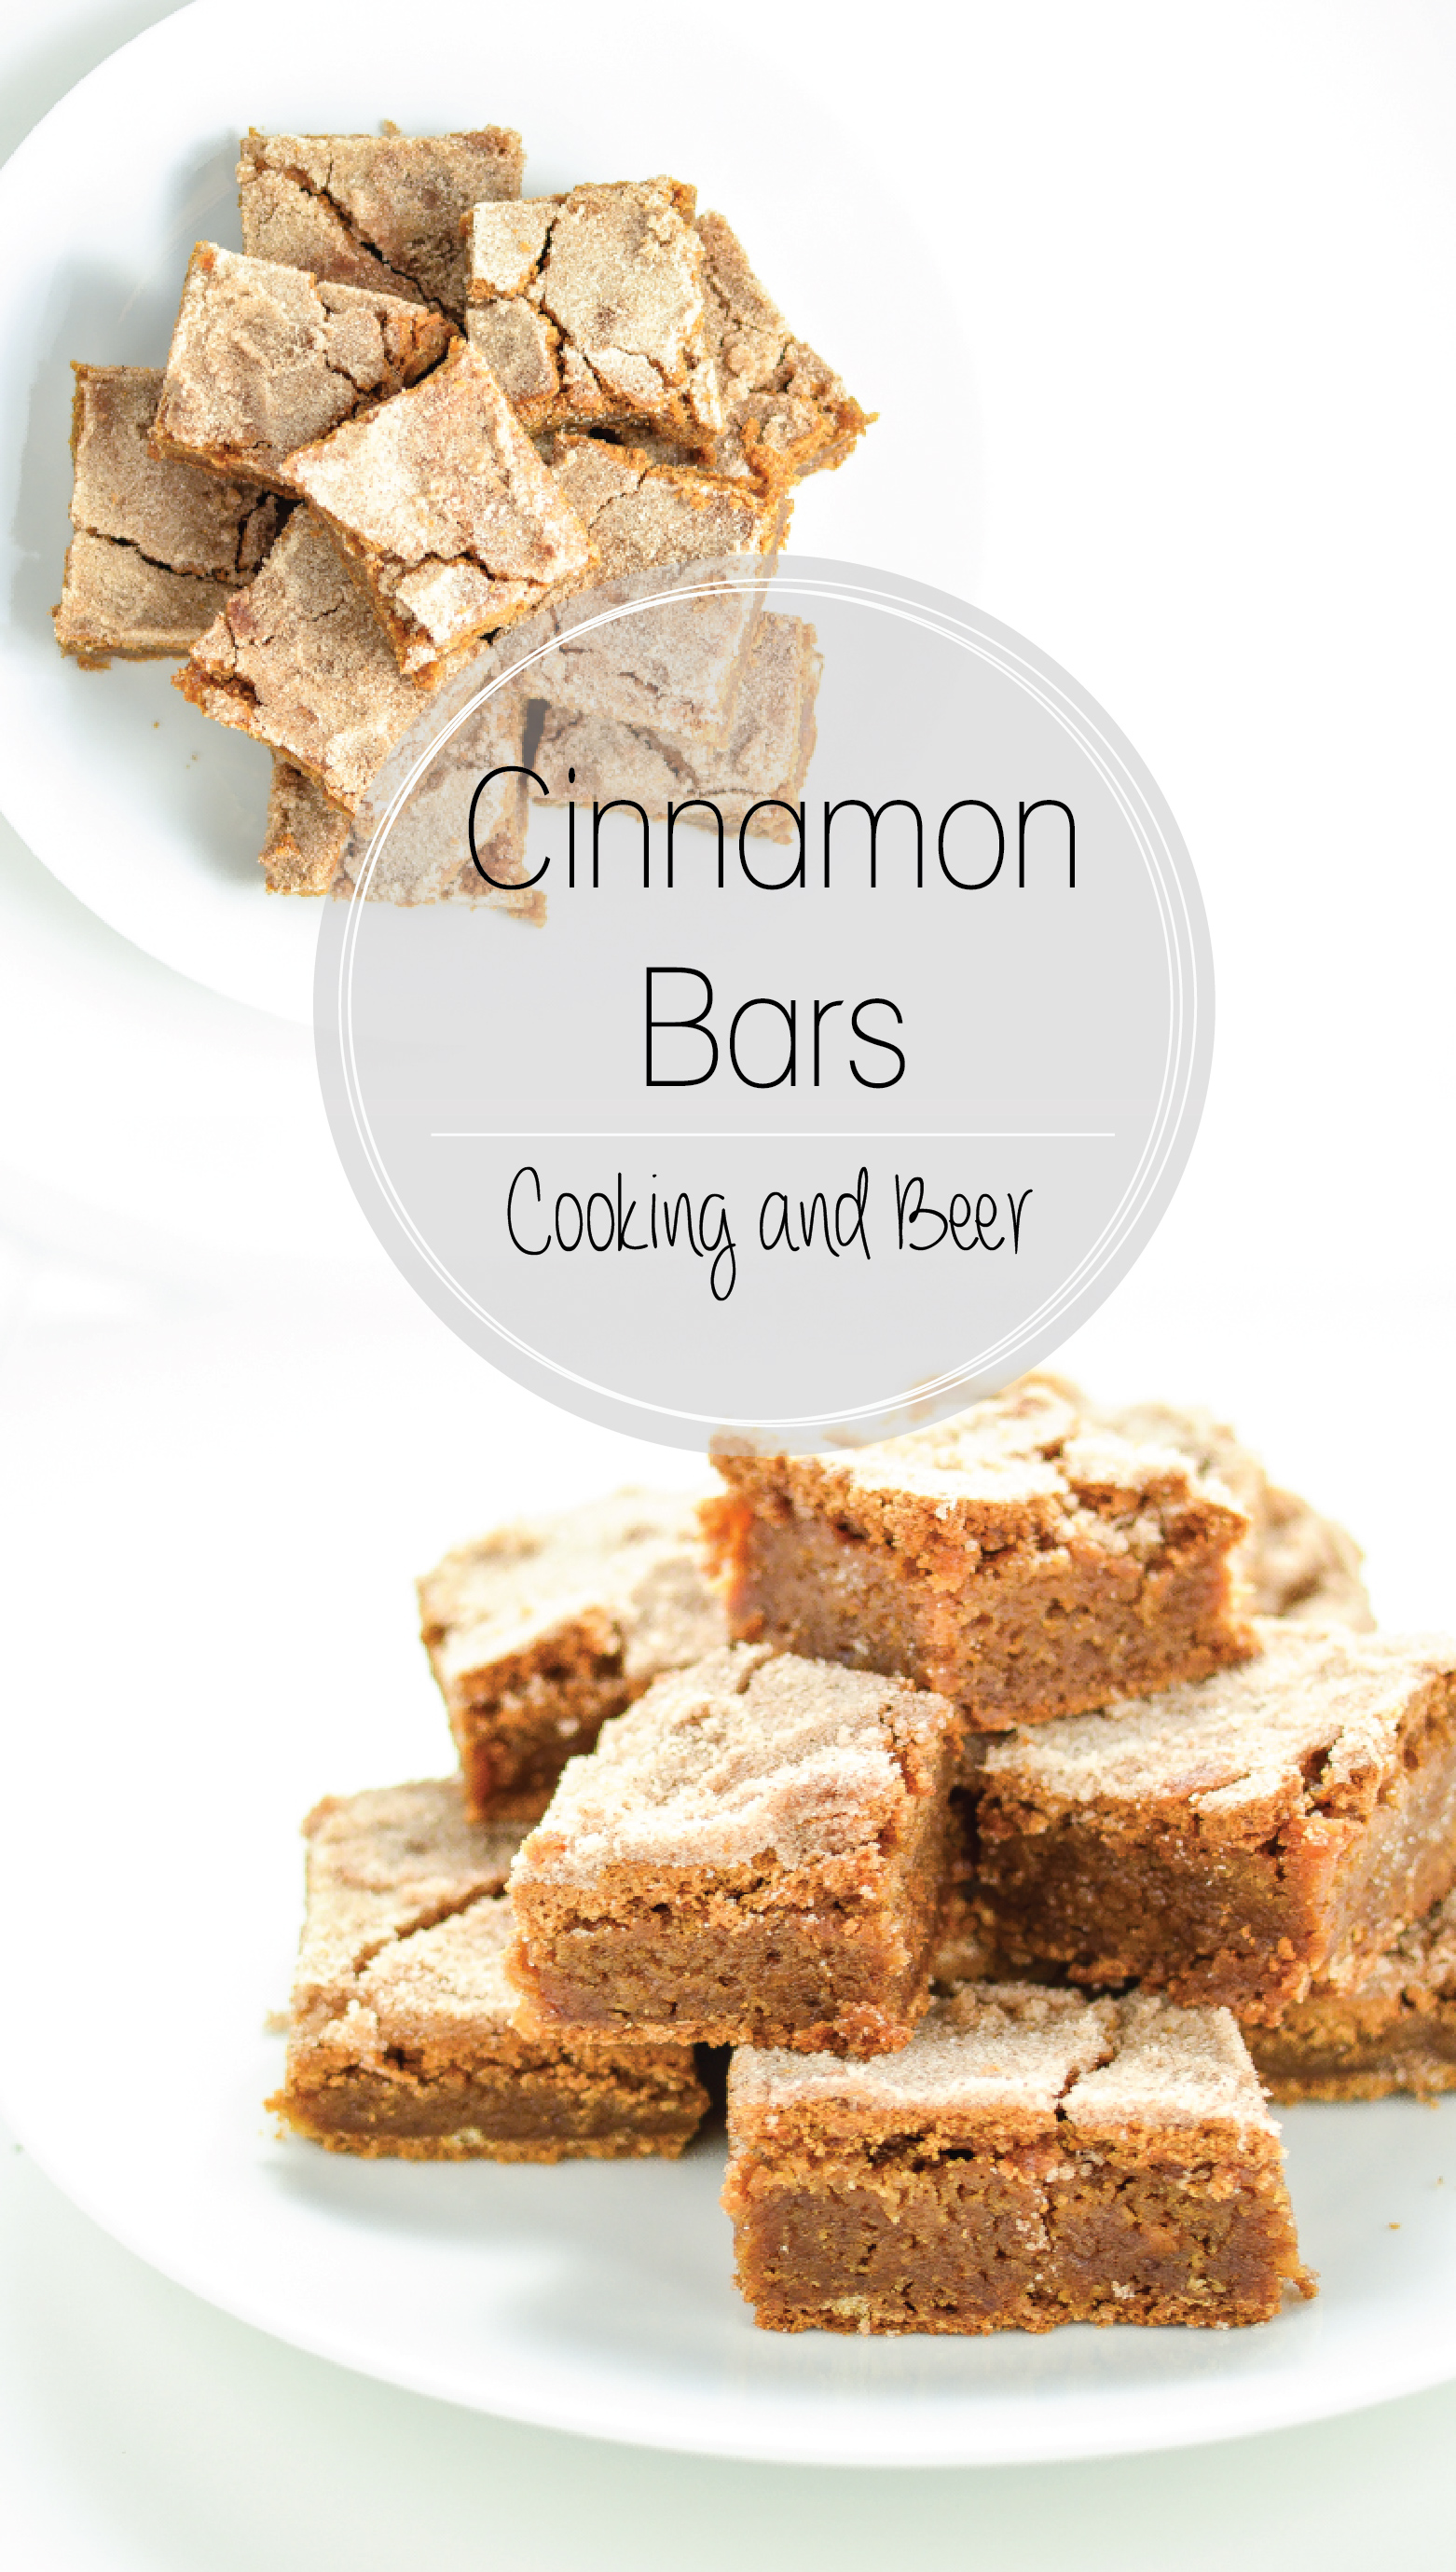 These cinnamon bars are the perfect sweet treat to serve this holiday season. They are packed full of cinnamon, sugar and delicious flavor!